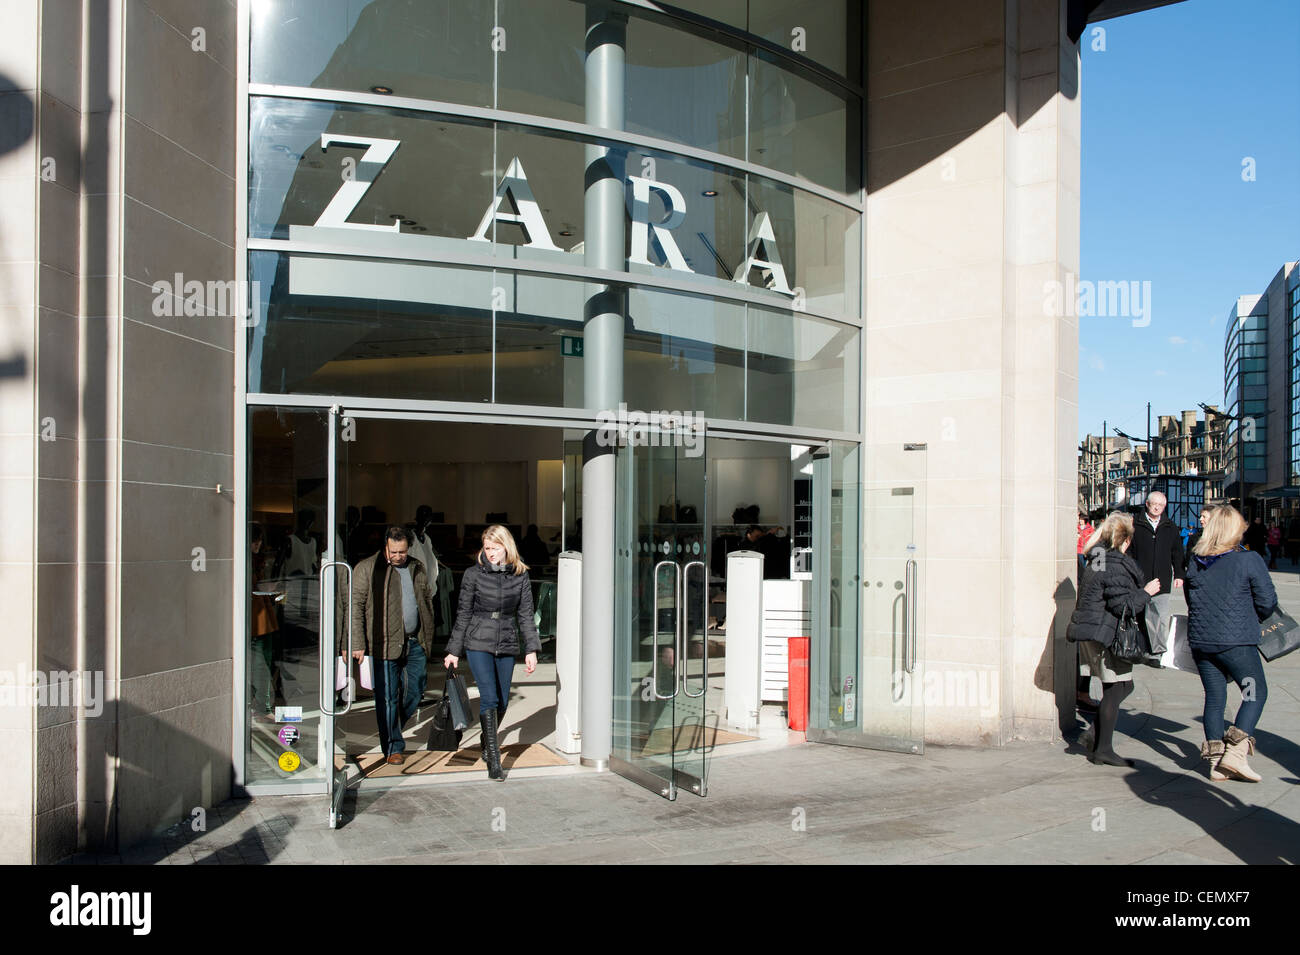 The Zara clothing shop located on New Cathedral Street / Market Street in  Manchester city centre, UK Stock Photo - Alamy